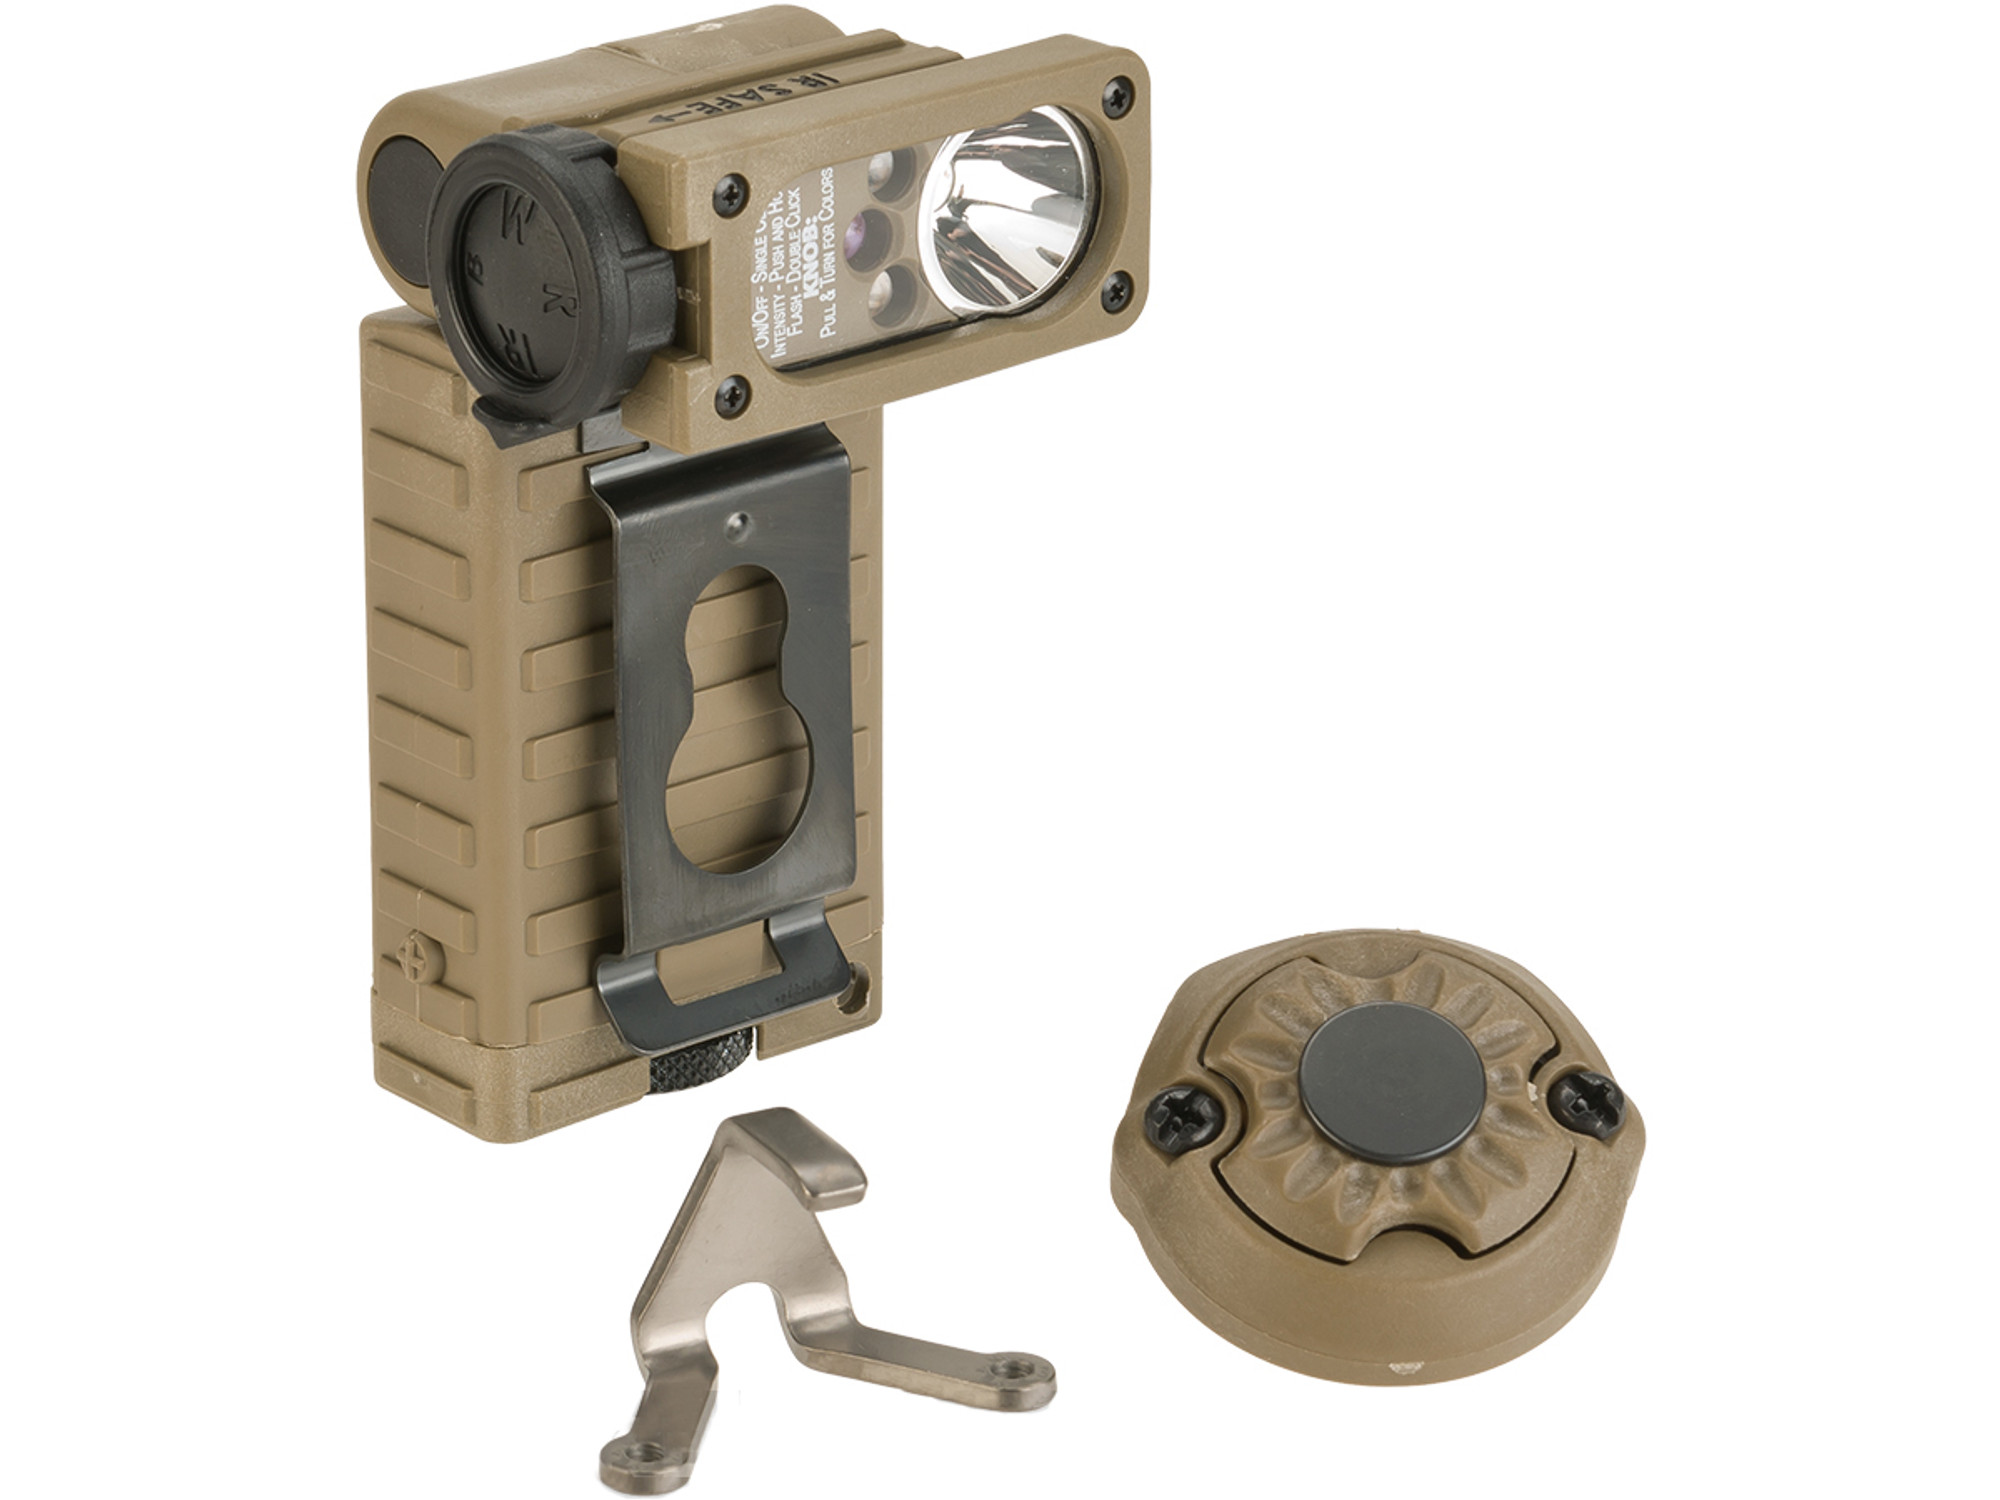 Streamlight Sidewinder Helmet Light System with "E" Mount - Coyote